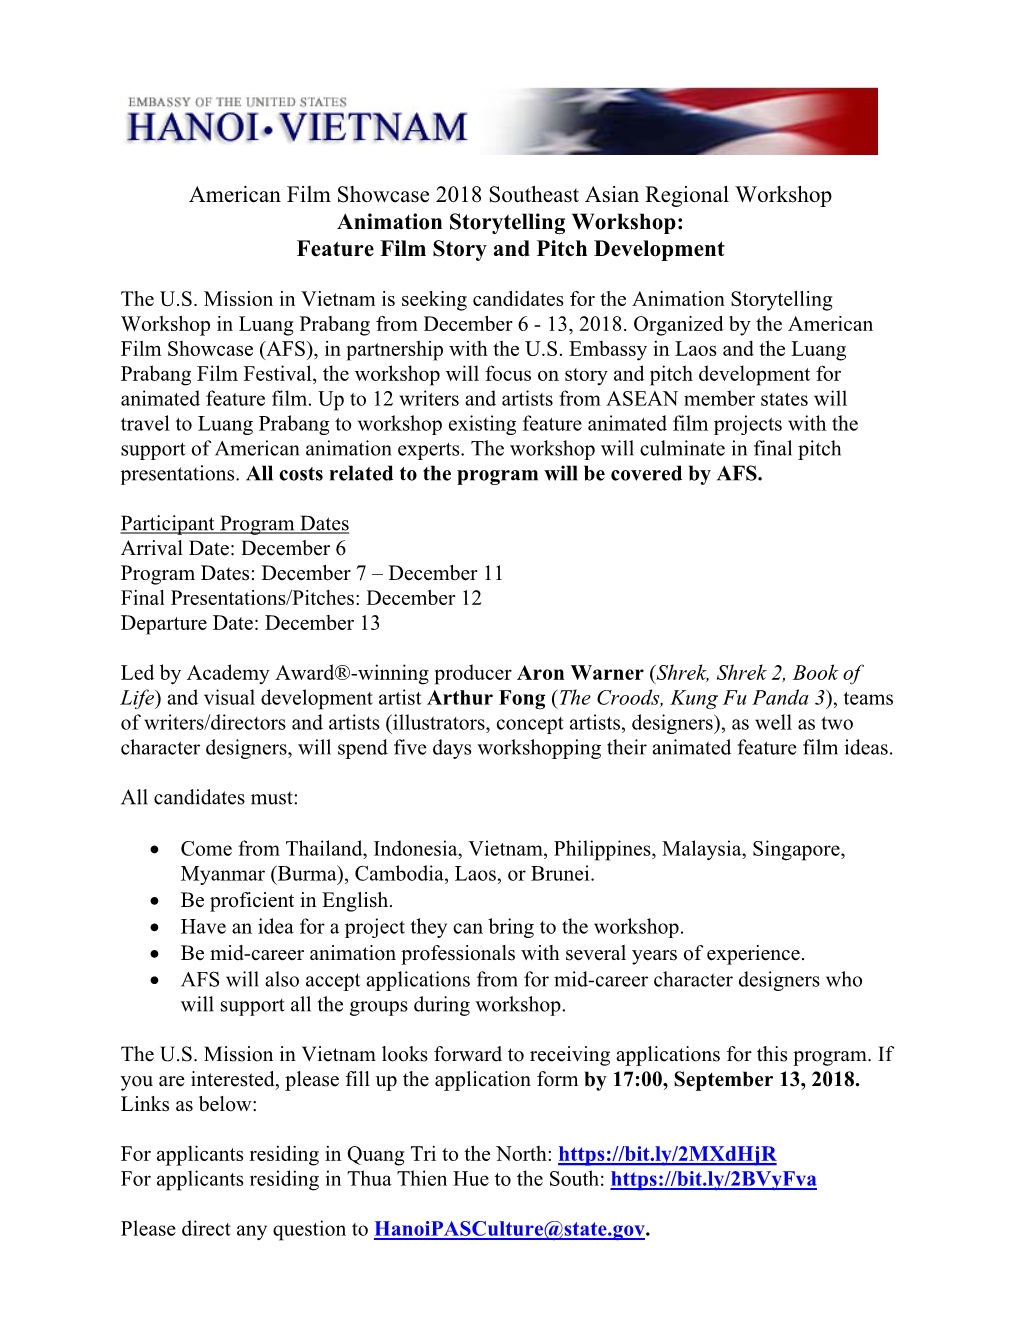 American Film Showcase 2018 Southeast Asian Regional Workshop Animation Storytelling Workshop: Feature Film Story and Pitch Development